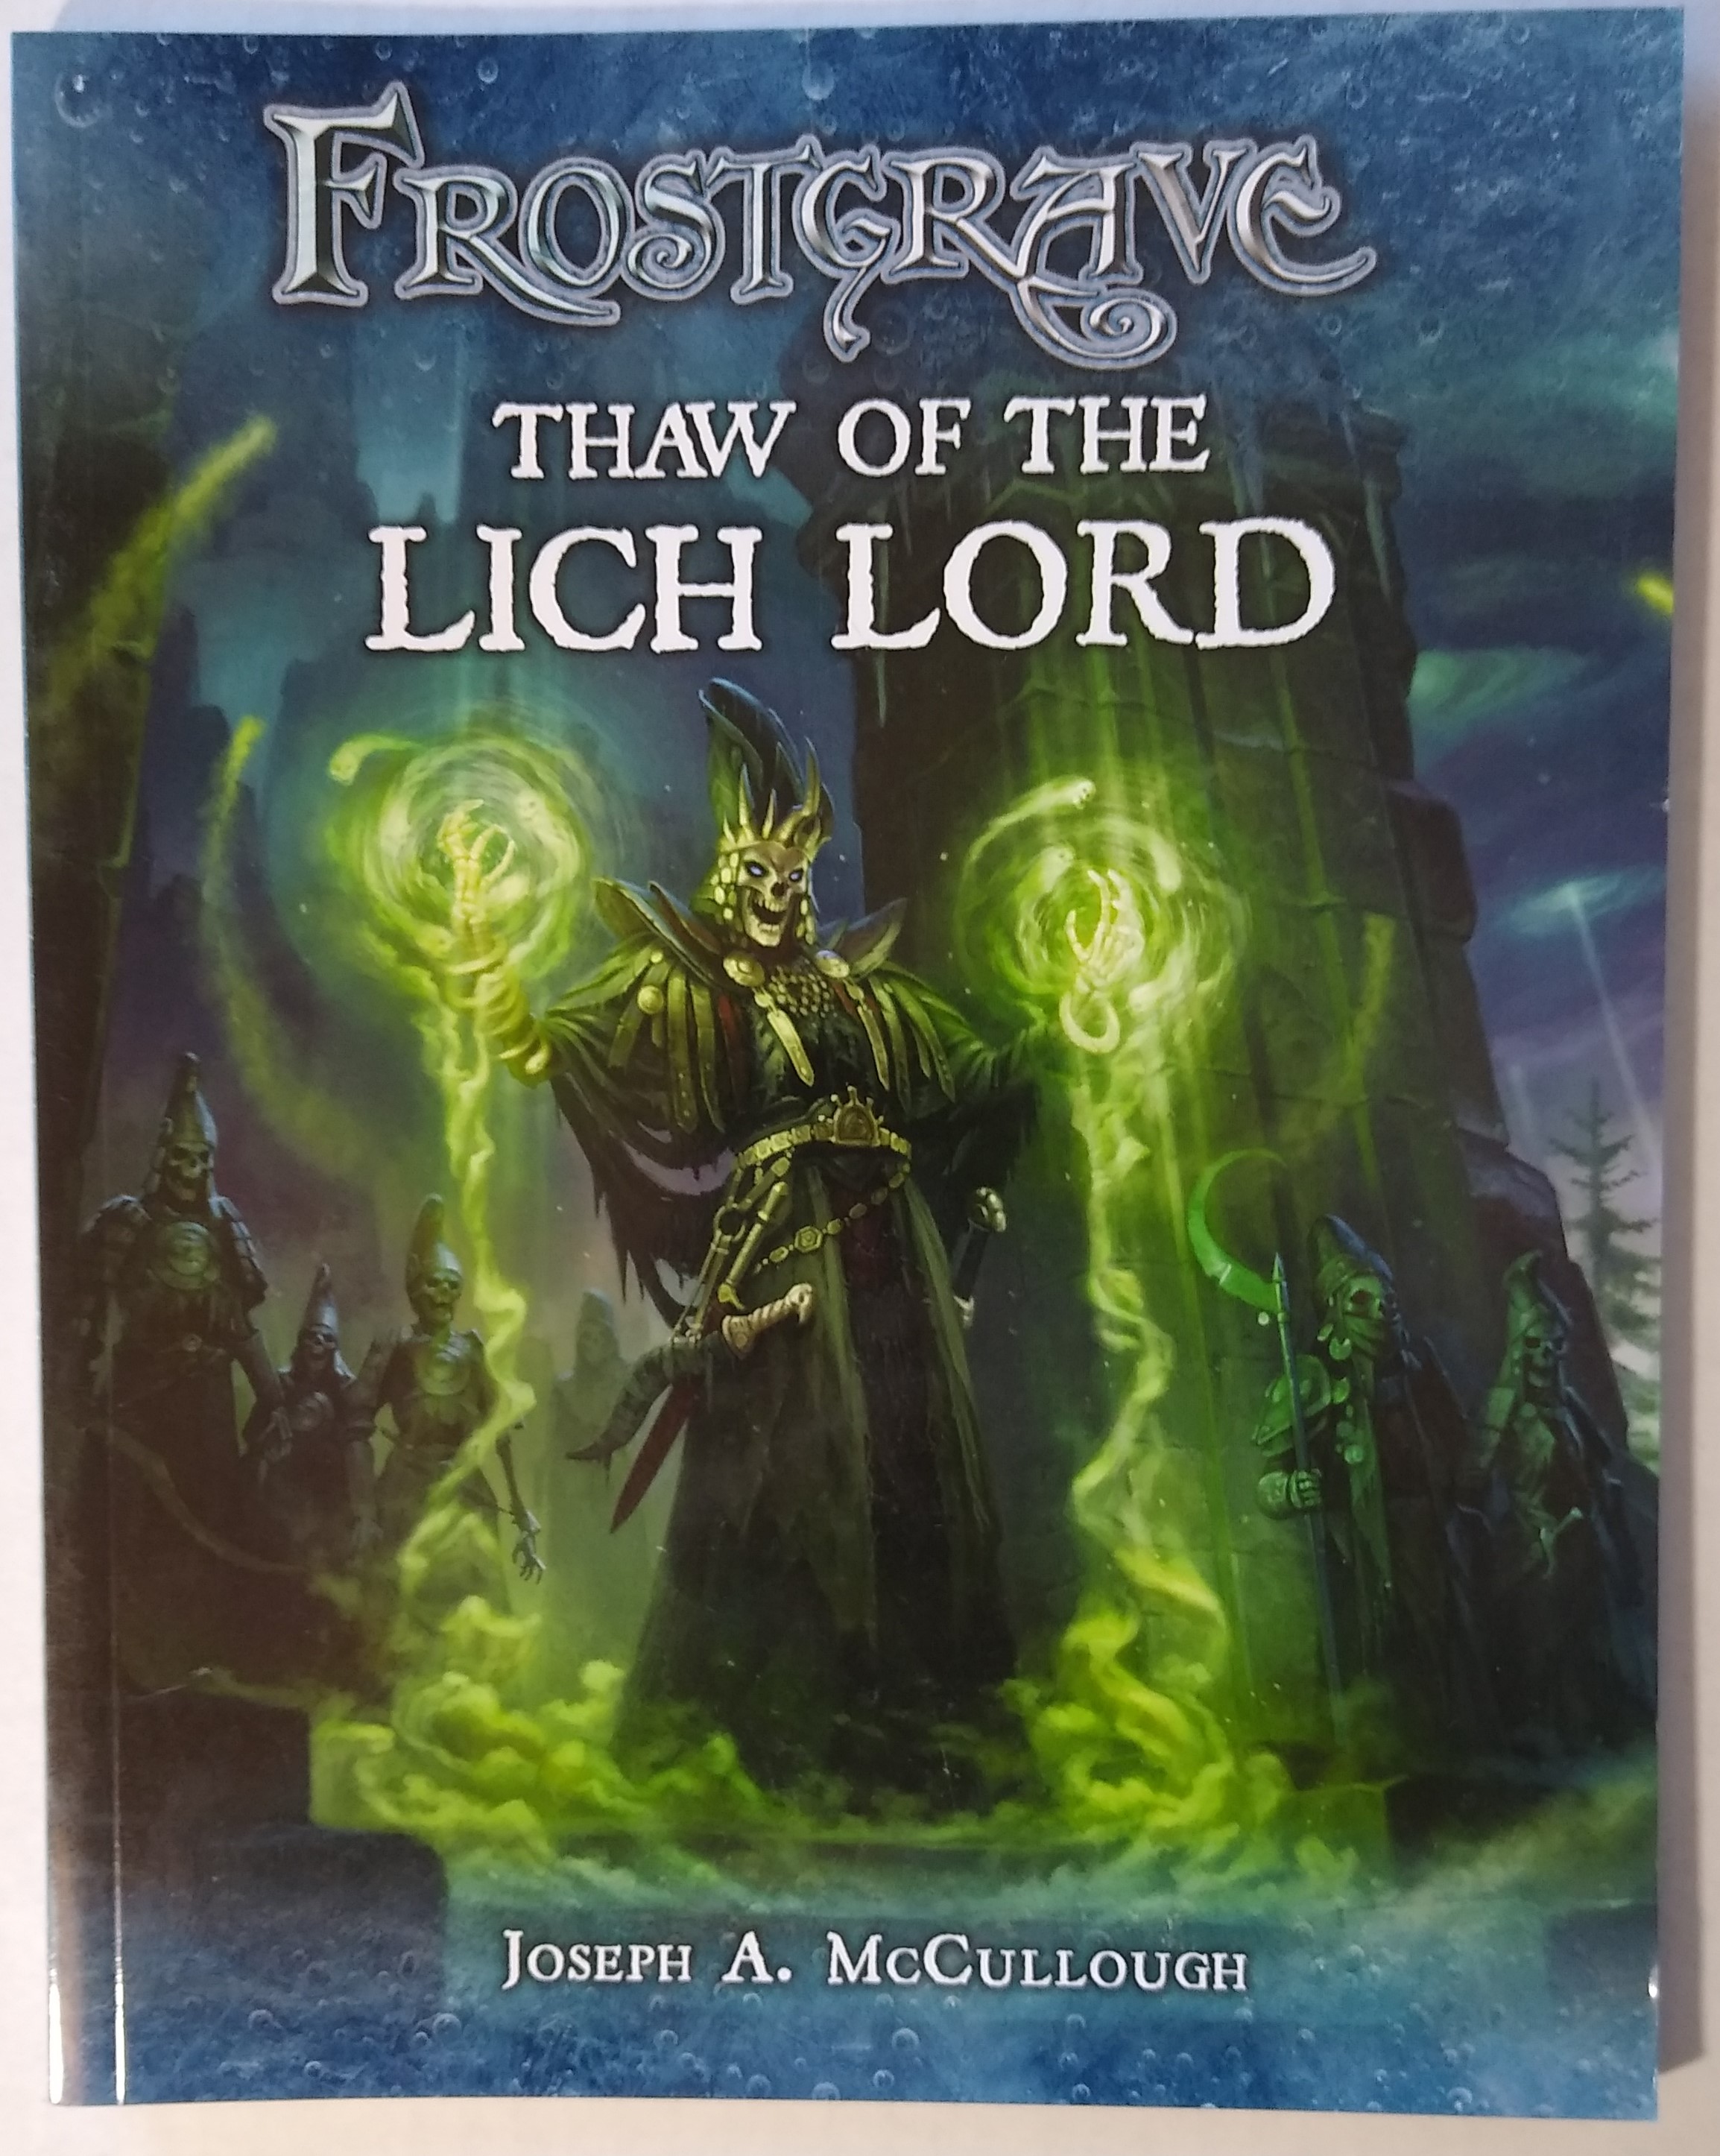 Cover of Frostgrave Thaw of the Lich Lord